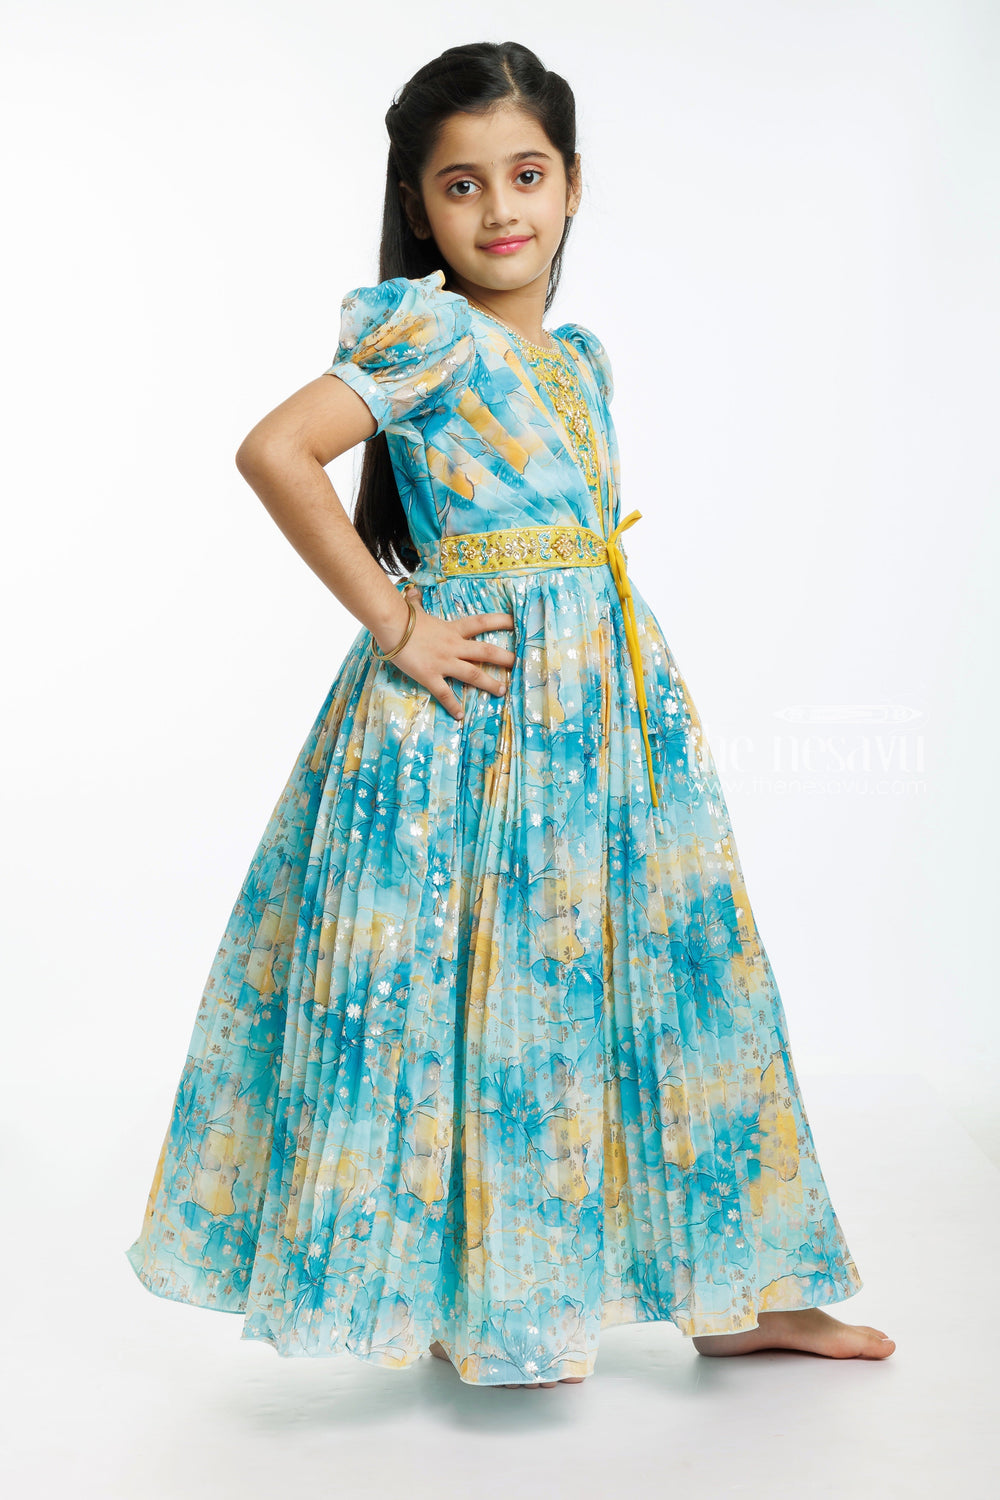 The Nesavu Girls Party Gown Sunshine Blossom Girls Anarkali Gown - A Whimsical Floral Dream Nesavu Whimsical Floral Girls Anarkali Gown | Enchanting Party Wear | The Nesavu